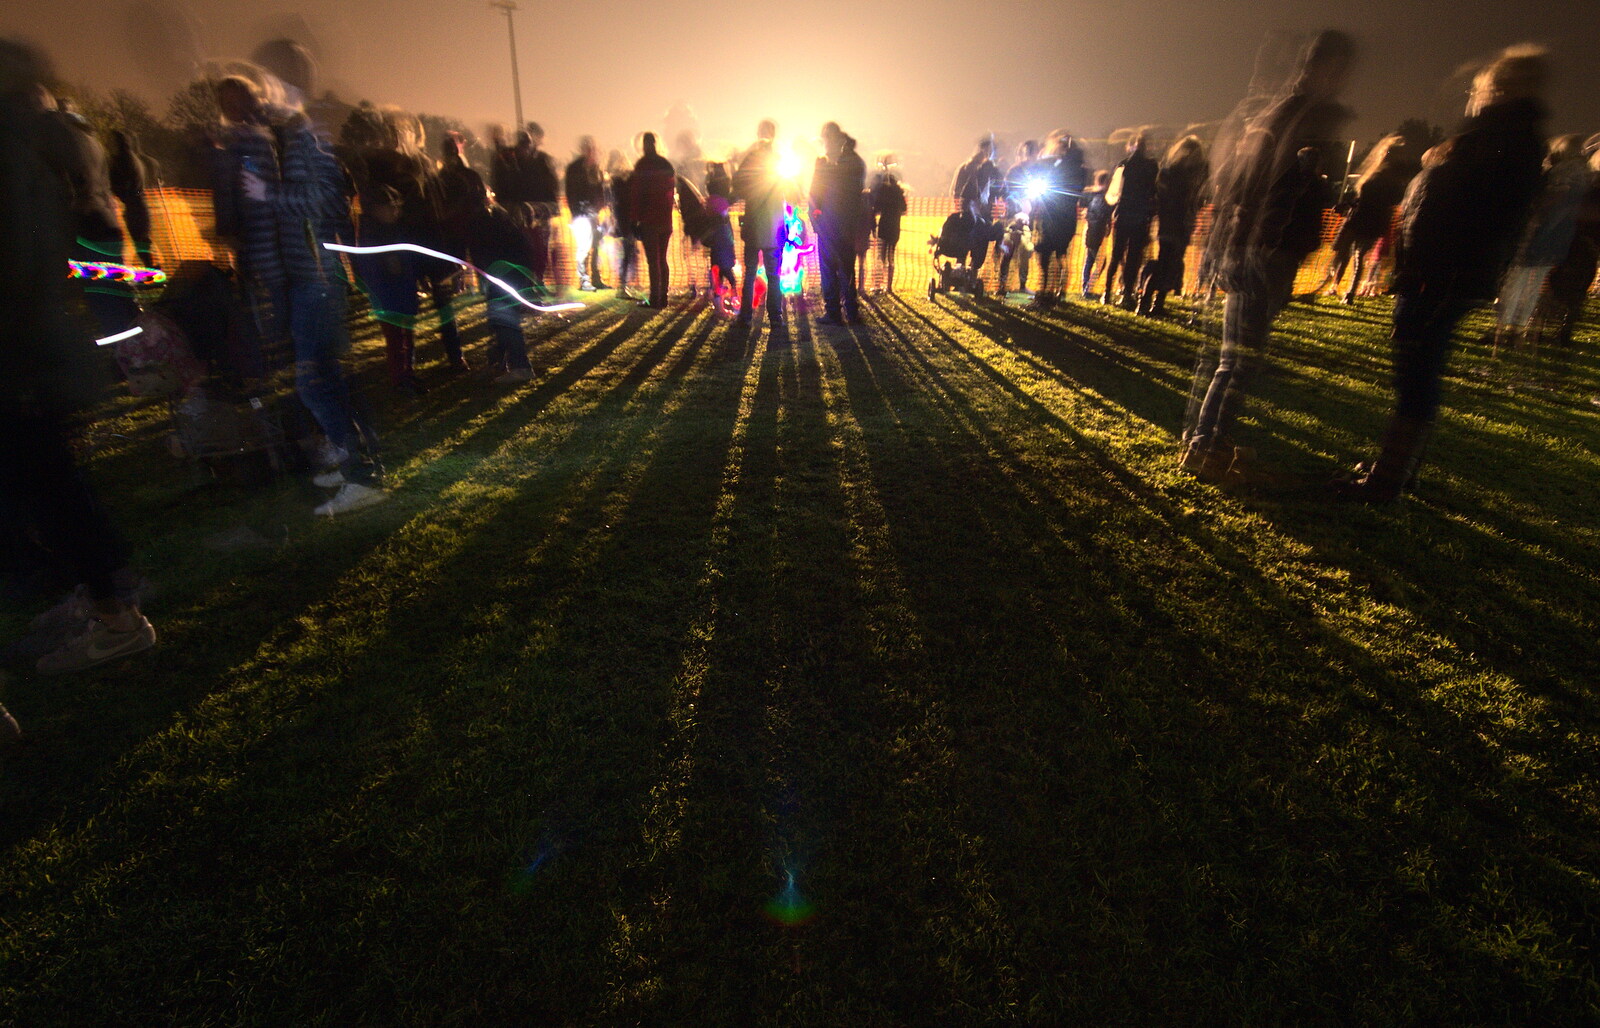 Long shadows in the night from Apples and Fireworks, Carleton Rode and Palgrave, Suffolk - 4th November 2018